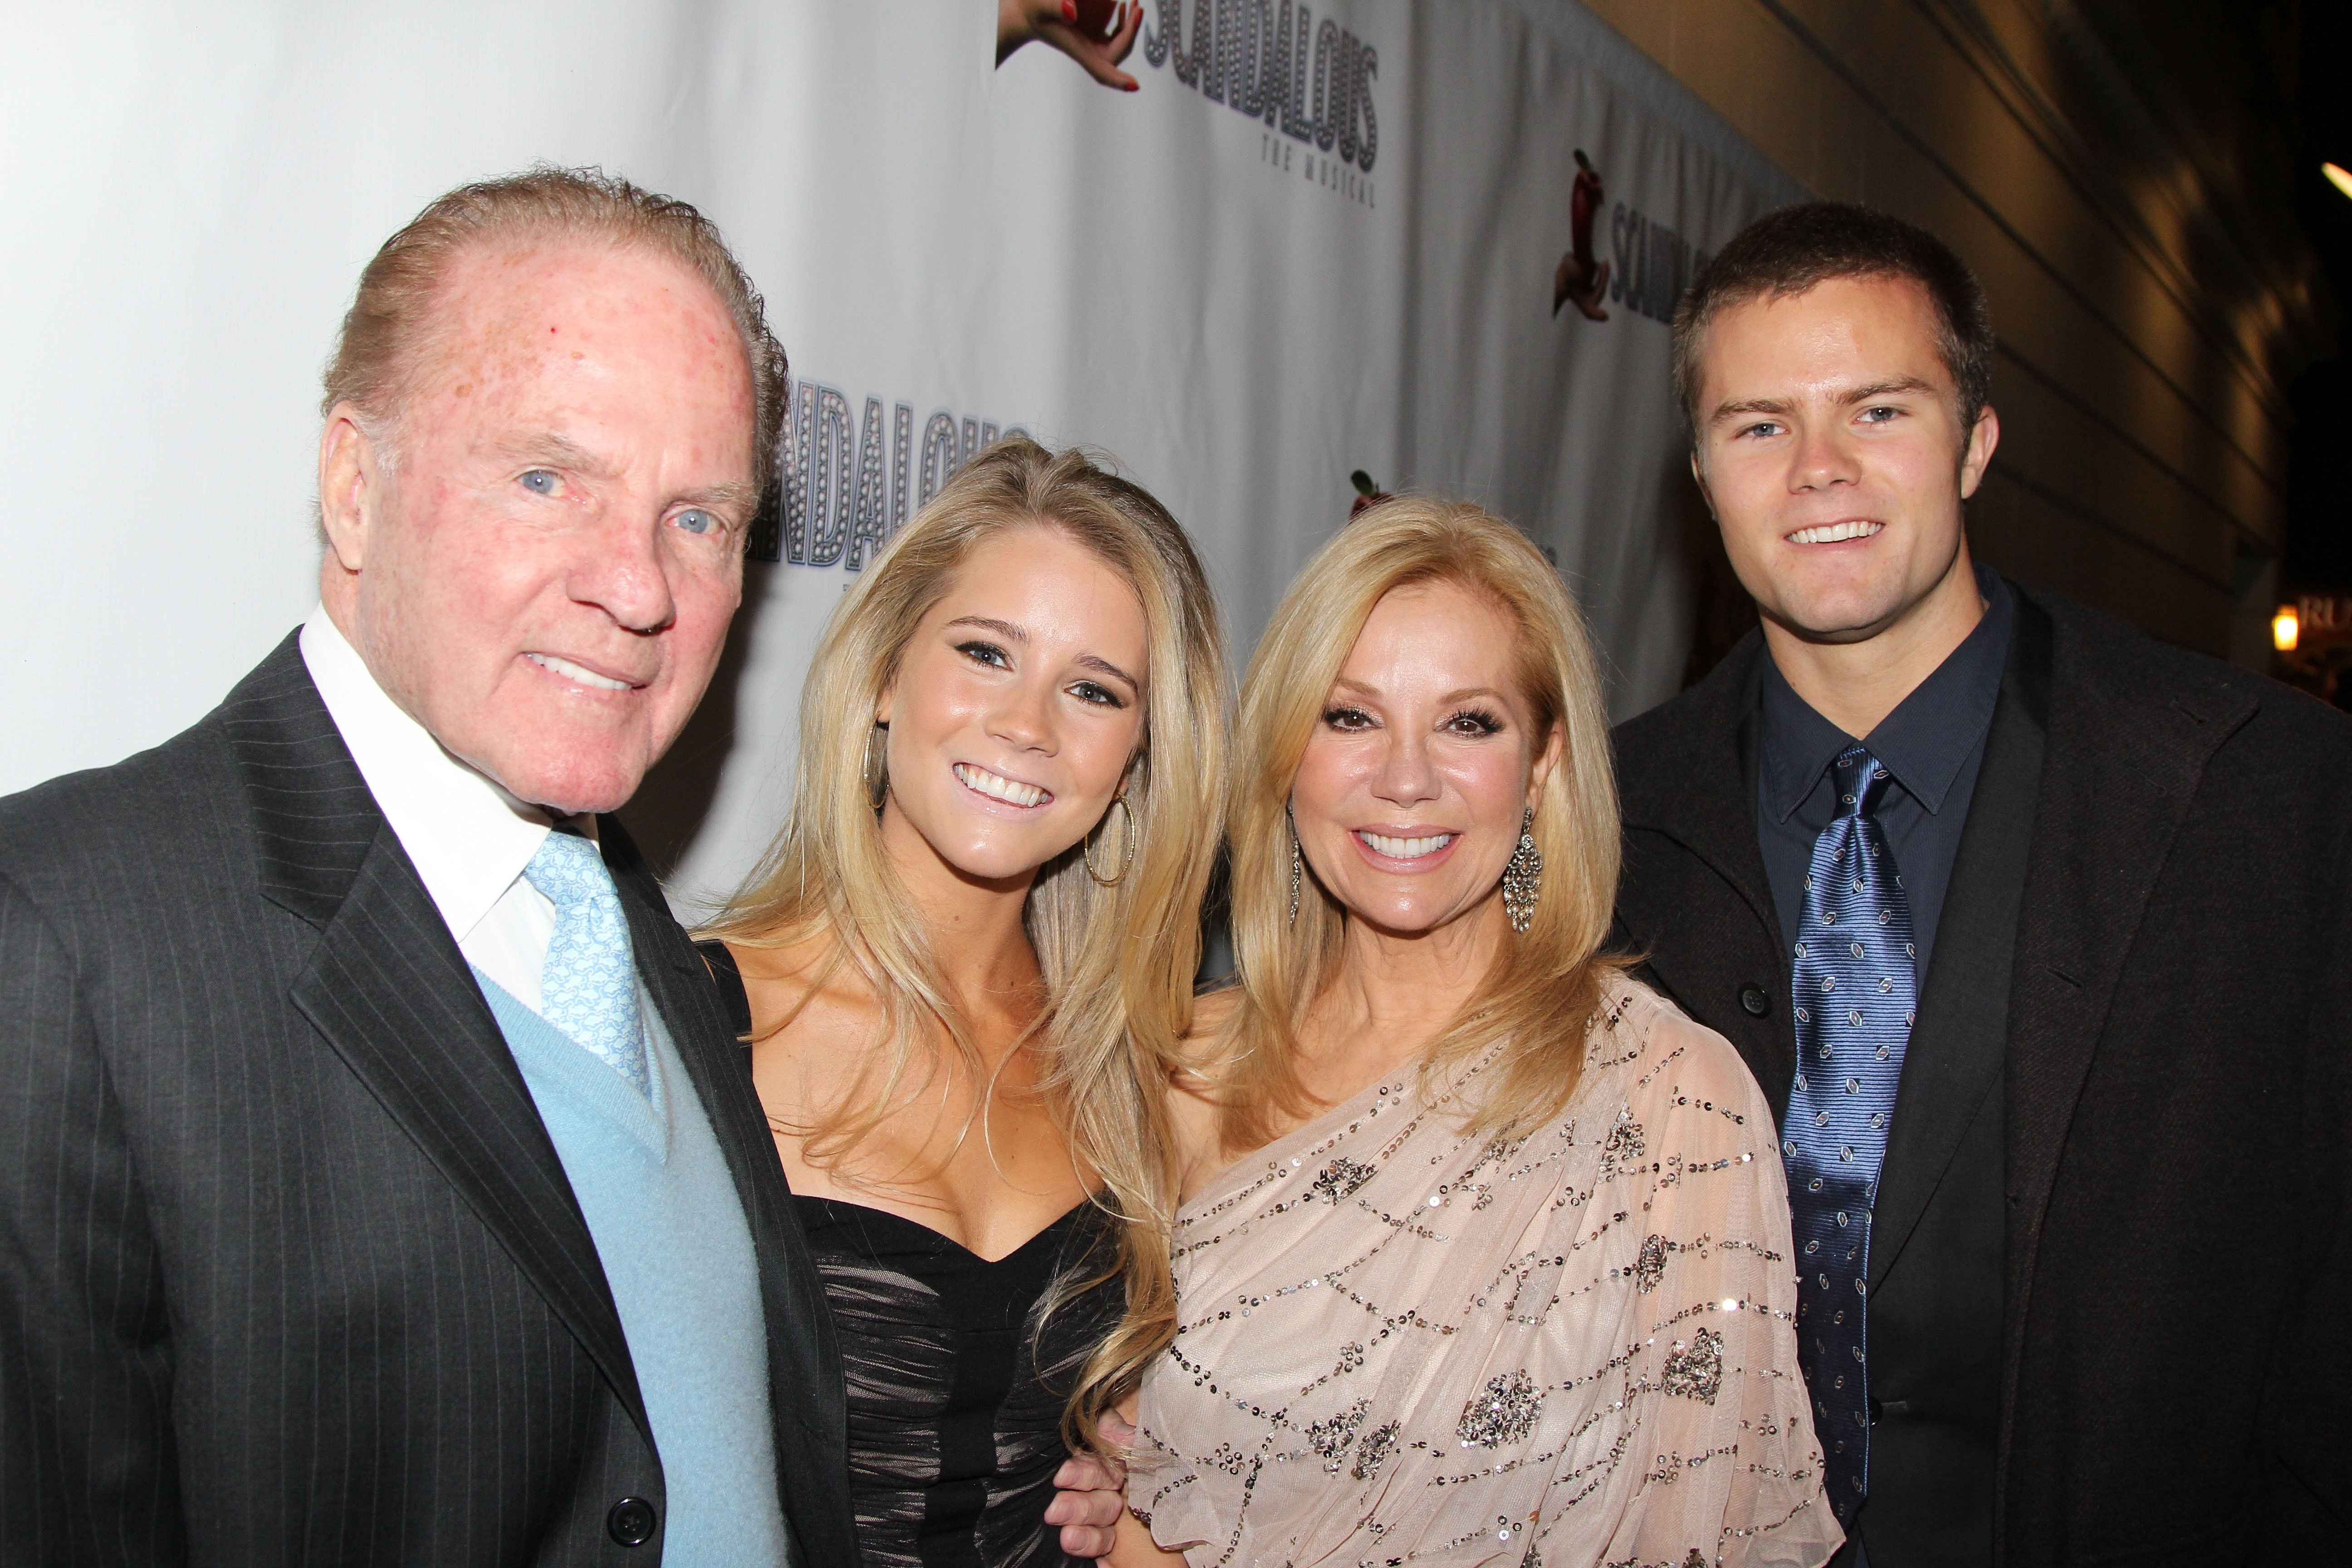 Frank, Cassidy, Kathie Lee, and Cody Gifford at the opening night of "Scandalous" on Broadway on November 15, 2012, in New York City. | Source: Bruce Glikas/FilmMagic/Getty Images